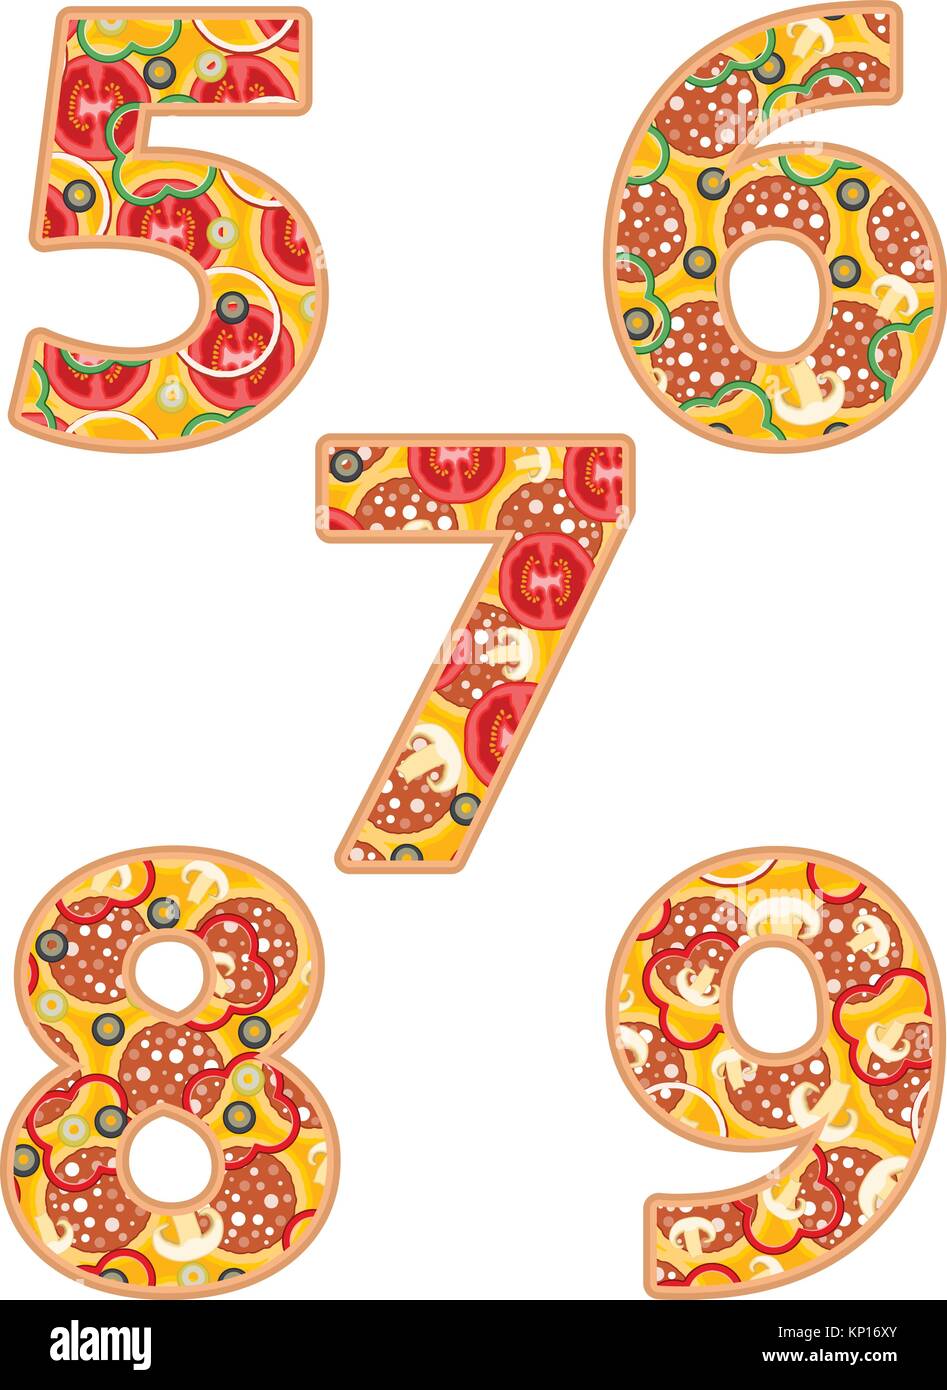 Pizza number 5 to 9 on a white background. Stock Vector